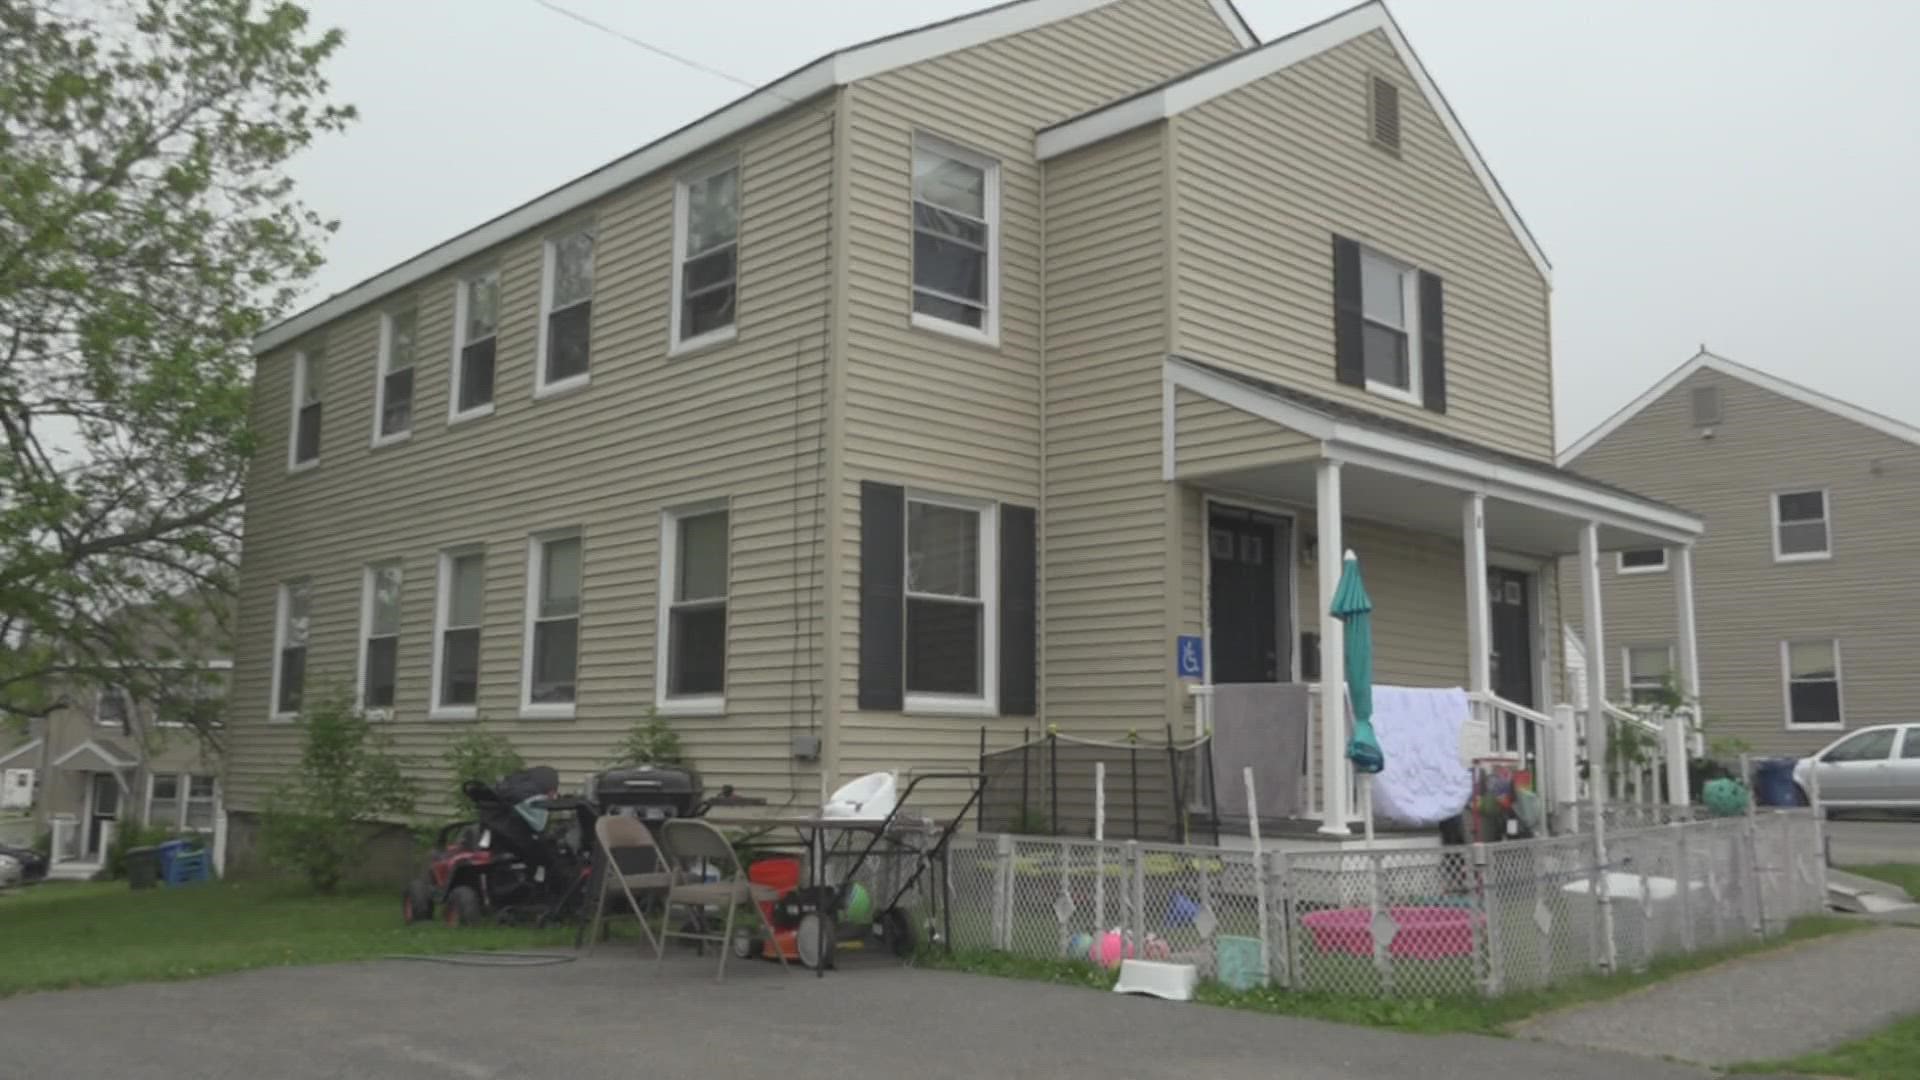 City councilors in South Portland are proposing a specifically catered eviction moratorium to fight against Redbank Village's proposed rent hikes.